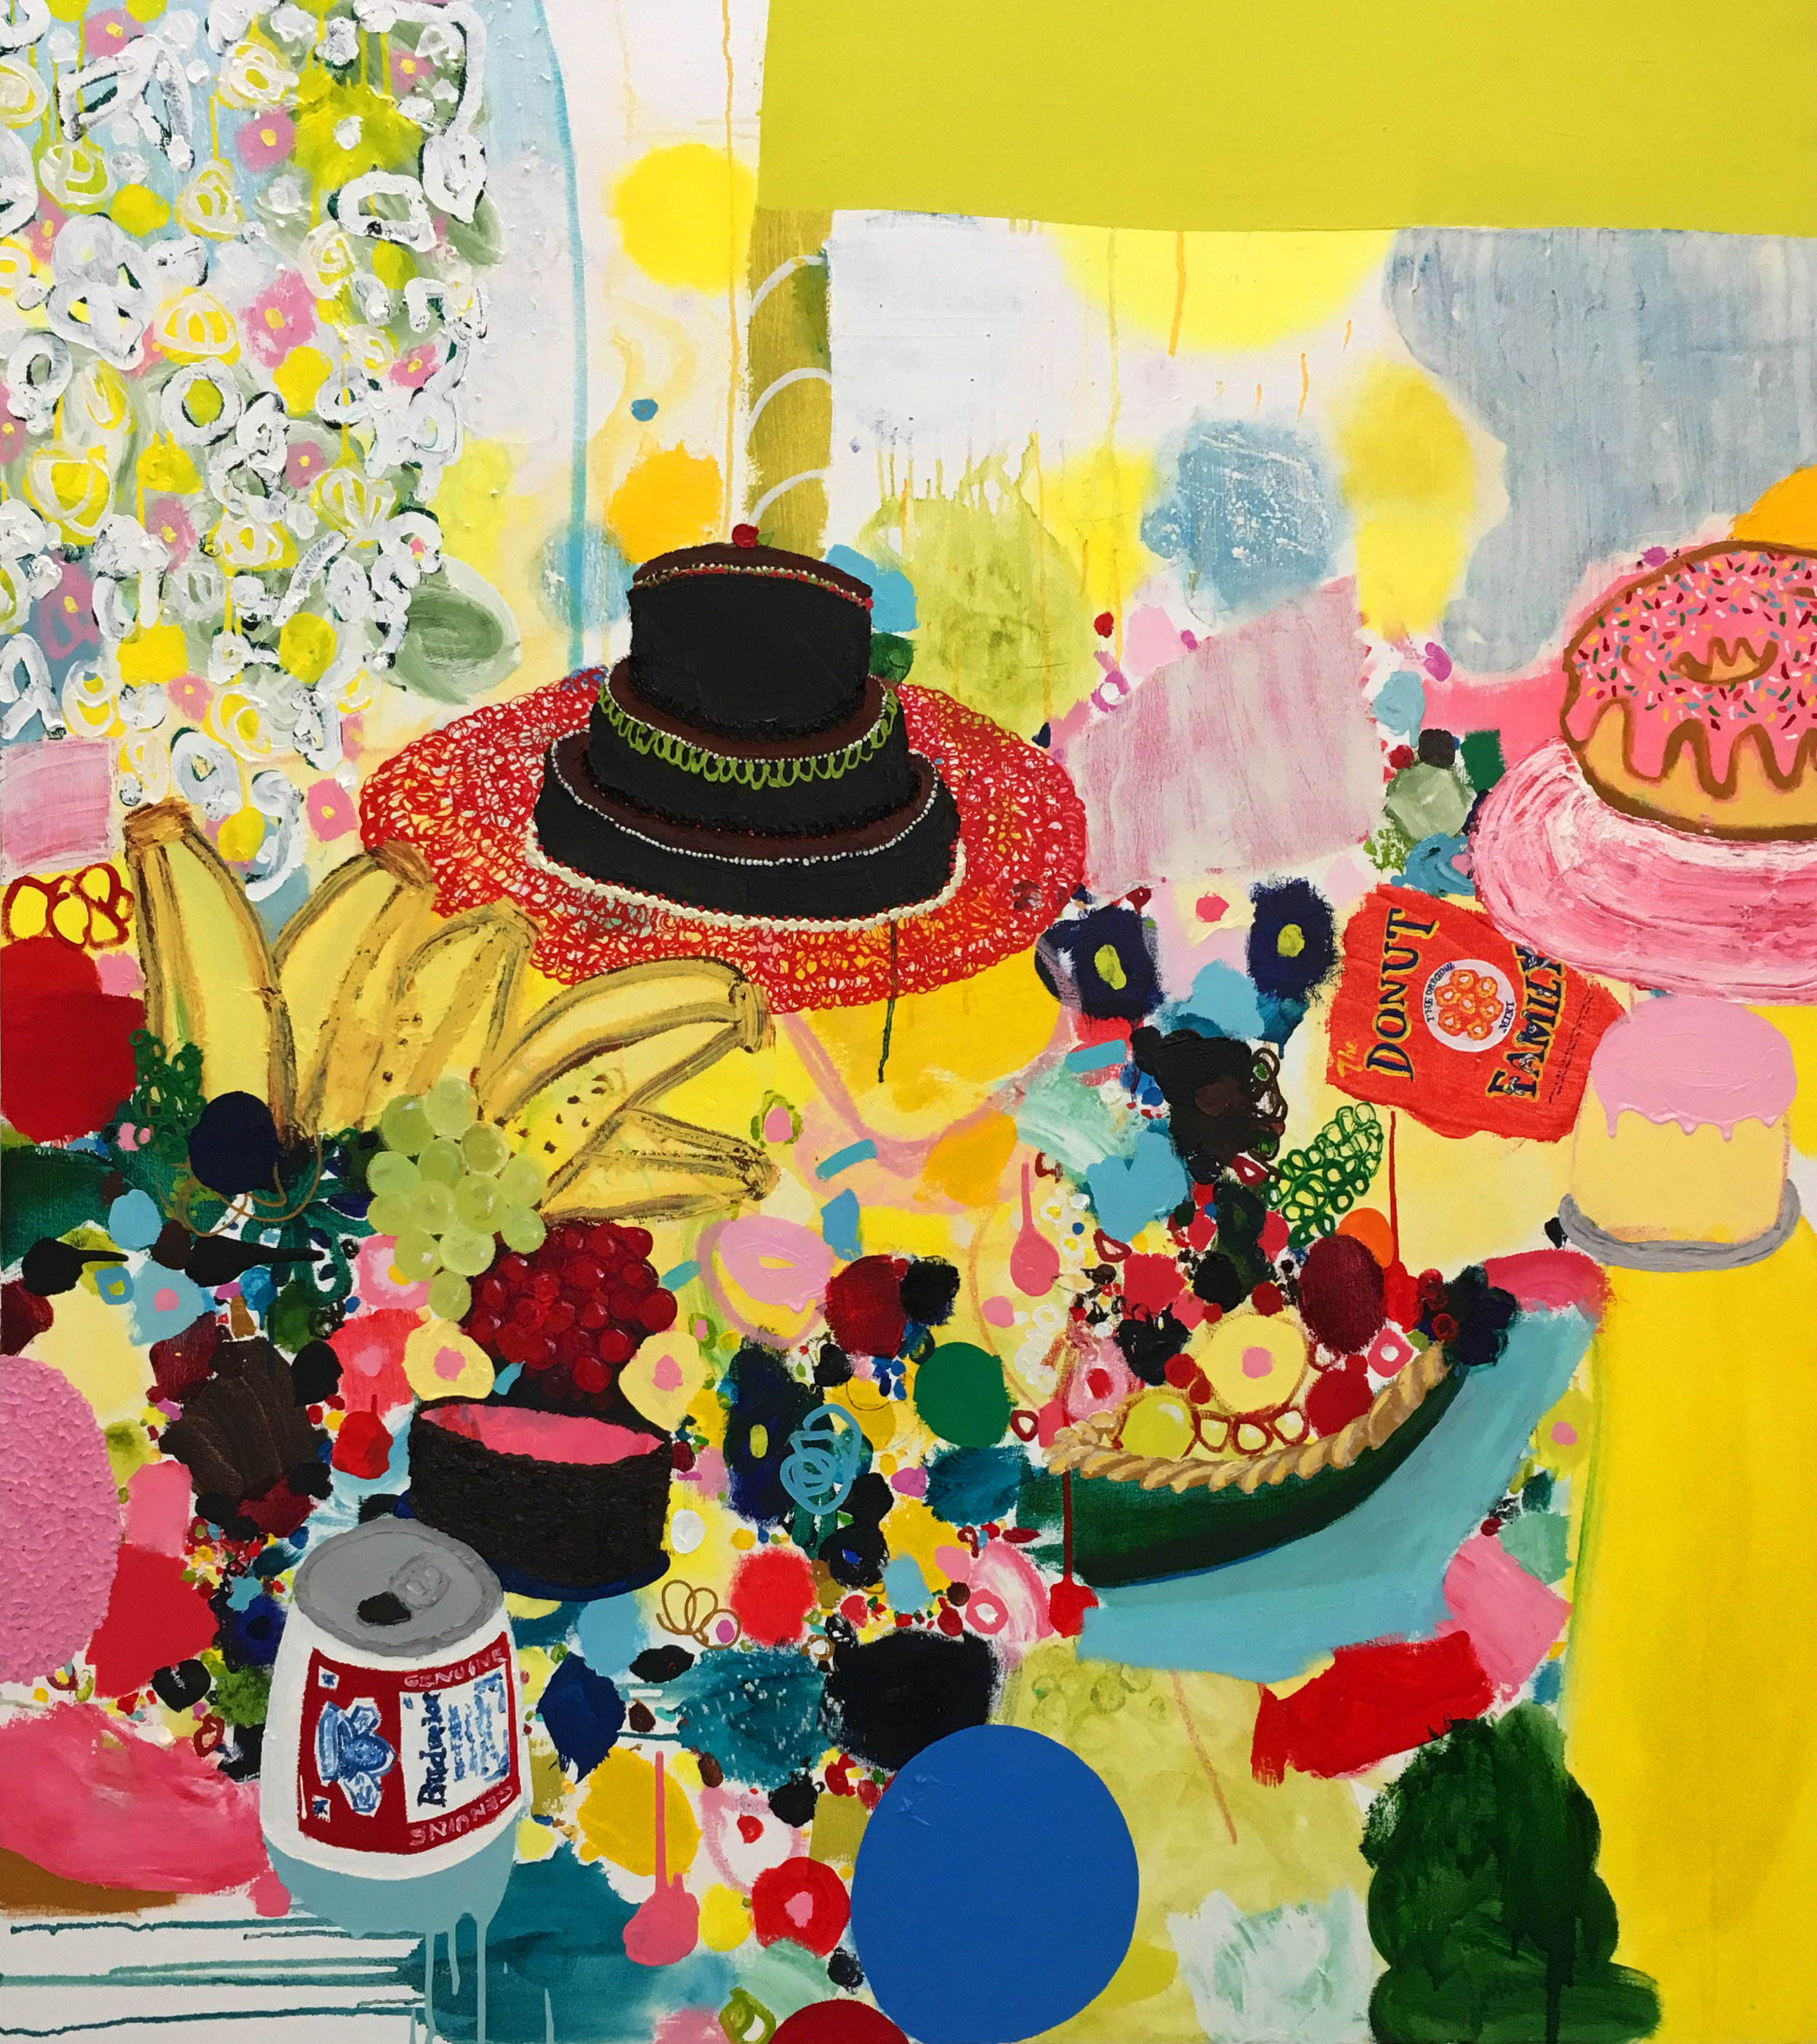  Tracy Miller,&nbsp; Banana Stand , 2016, Oil on Canvas, 54 x 48 inches 